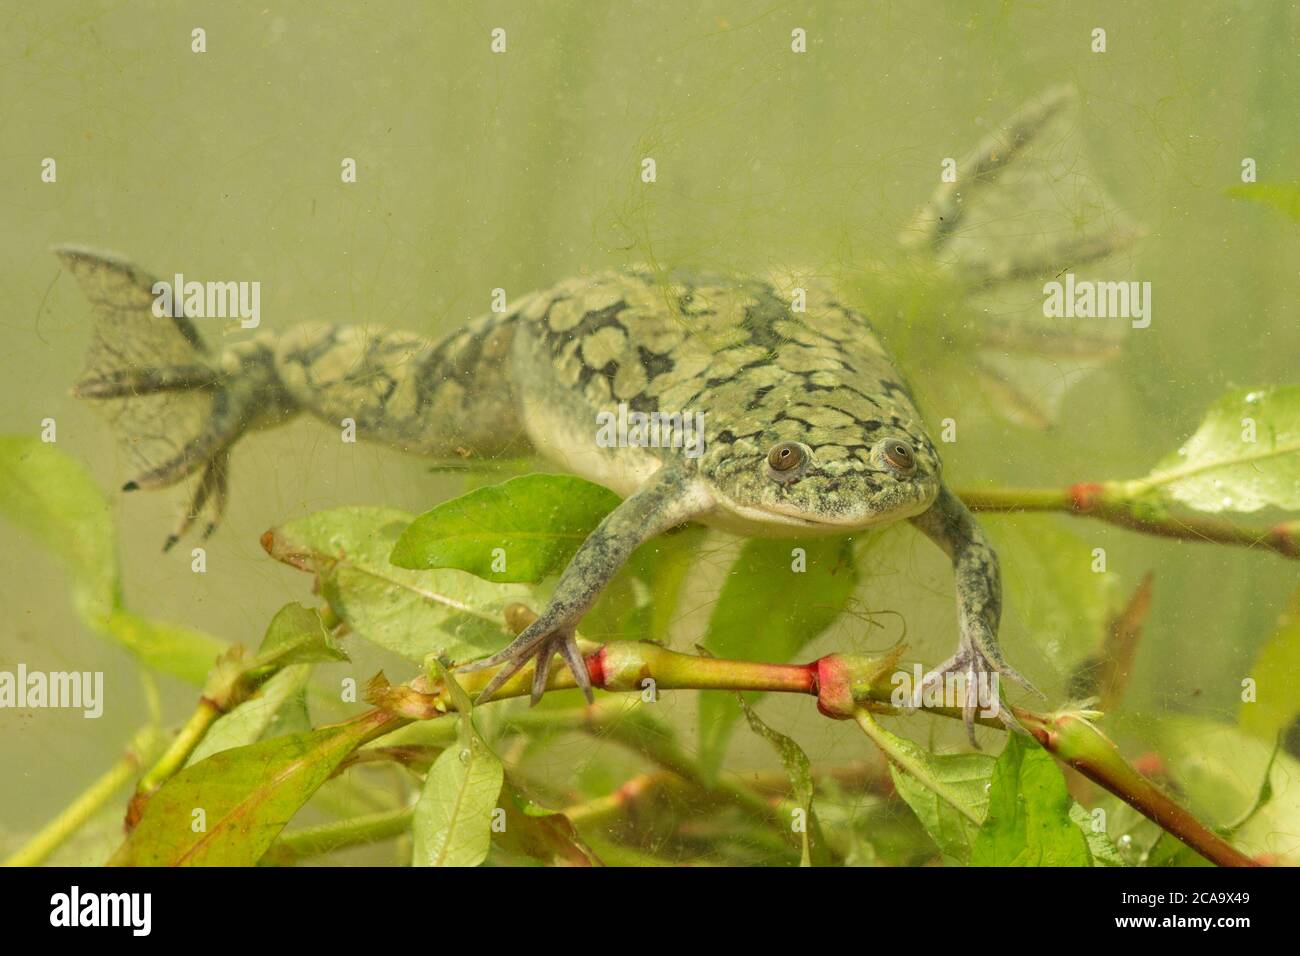 African clawed frog (Xenopus laevis, also known as the xenopus, African clawed toad, African claw-toed frog or the platanna) is a species of African Stock Photo